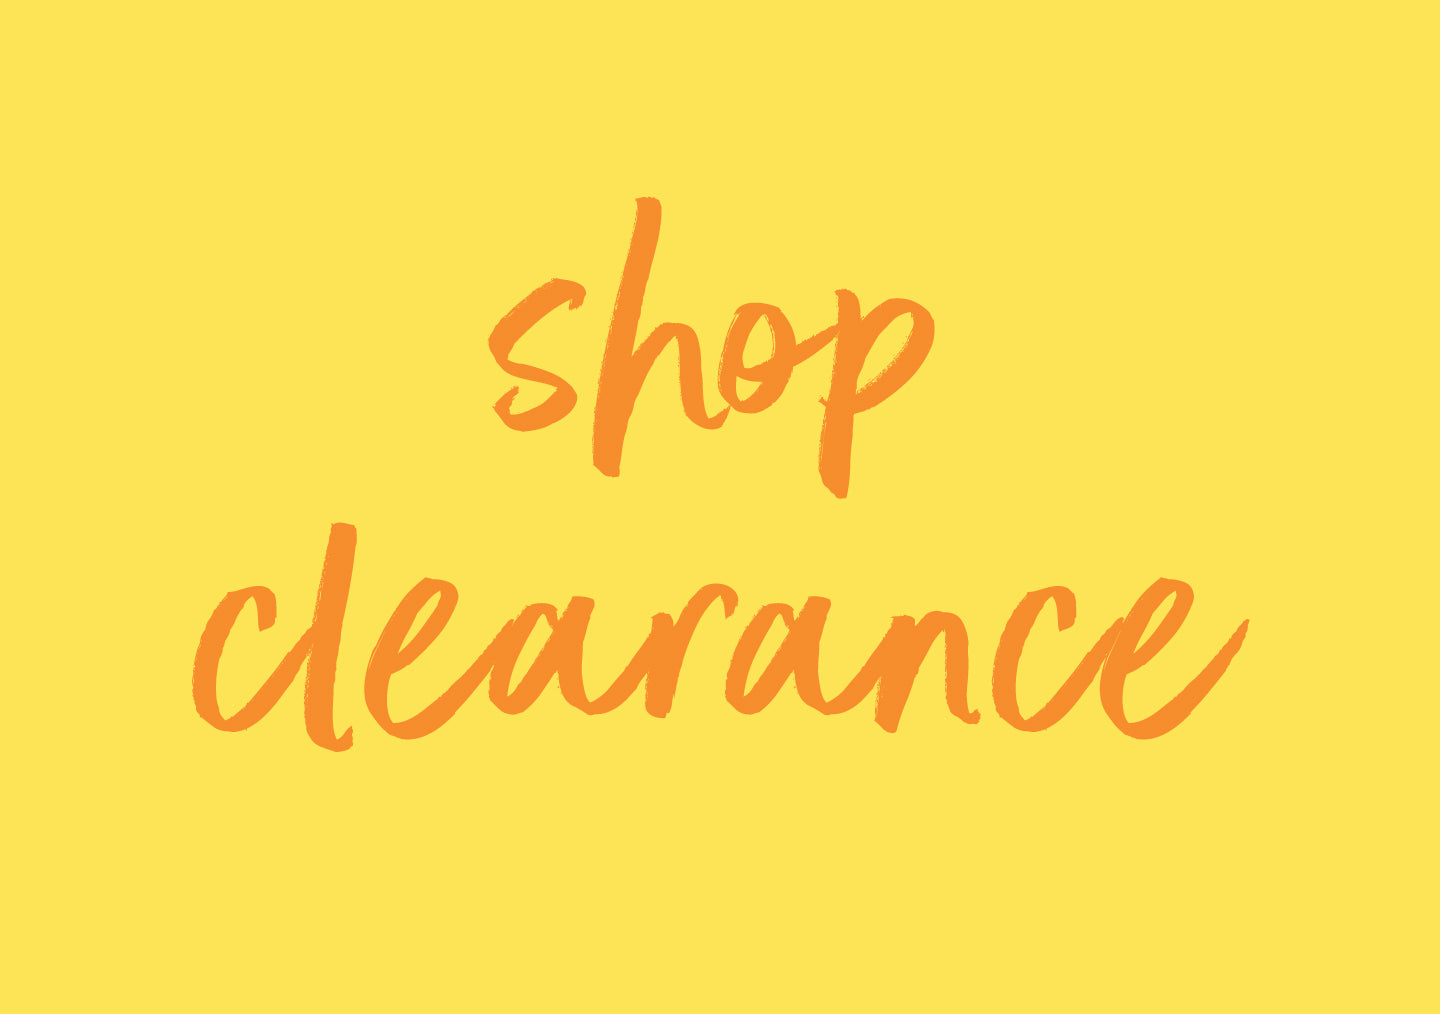 Clearance: Shop All